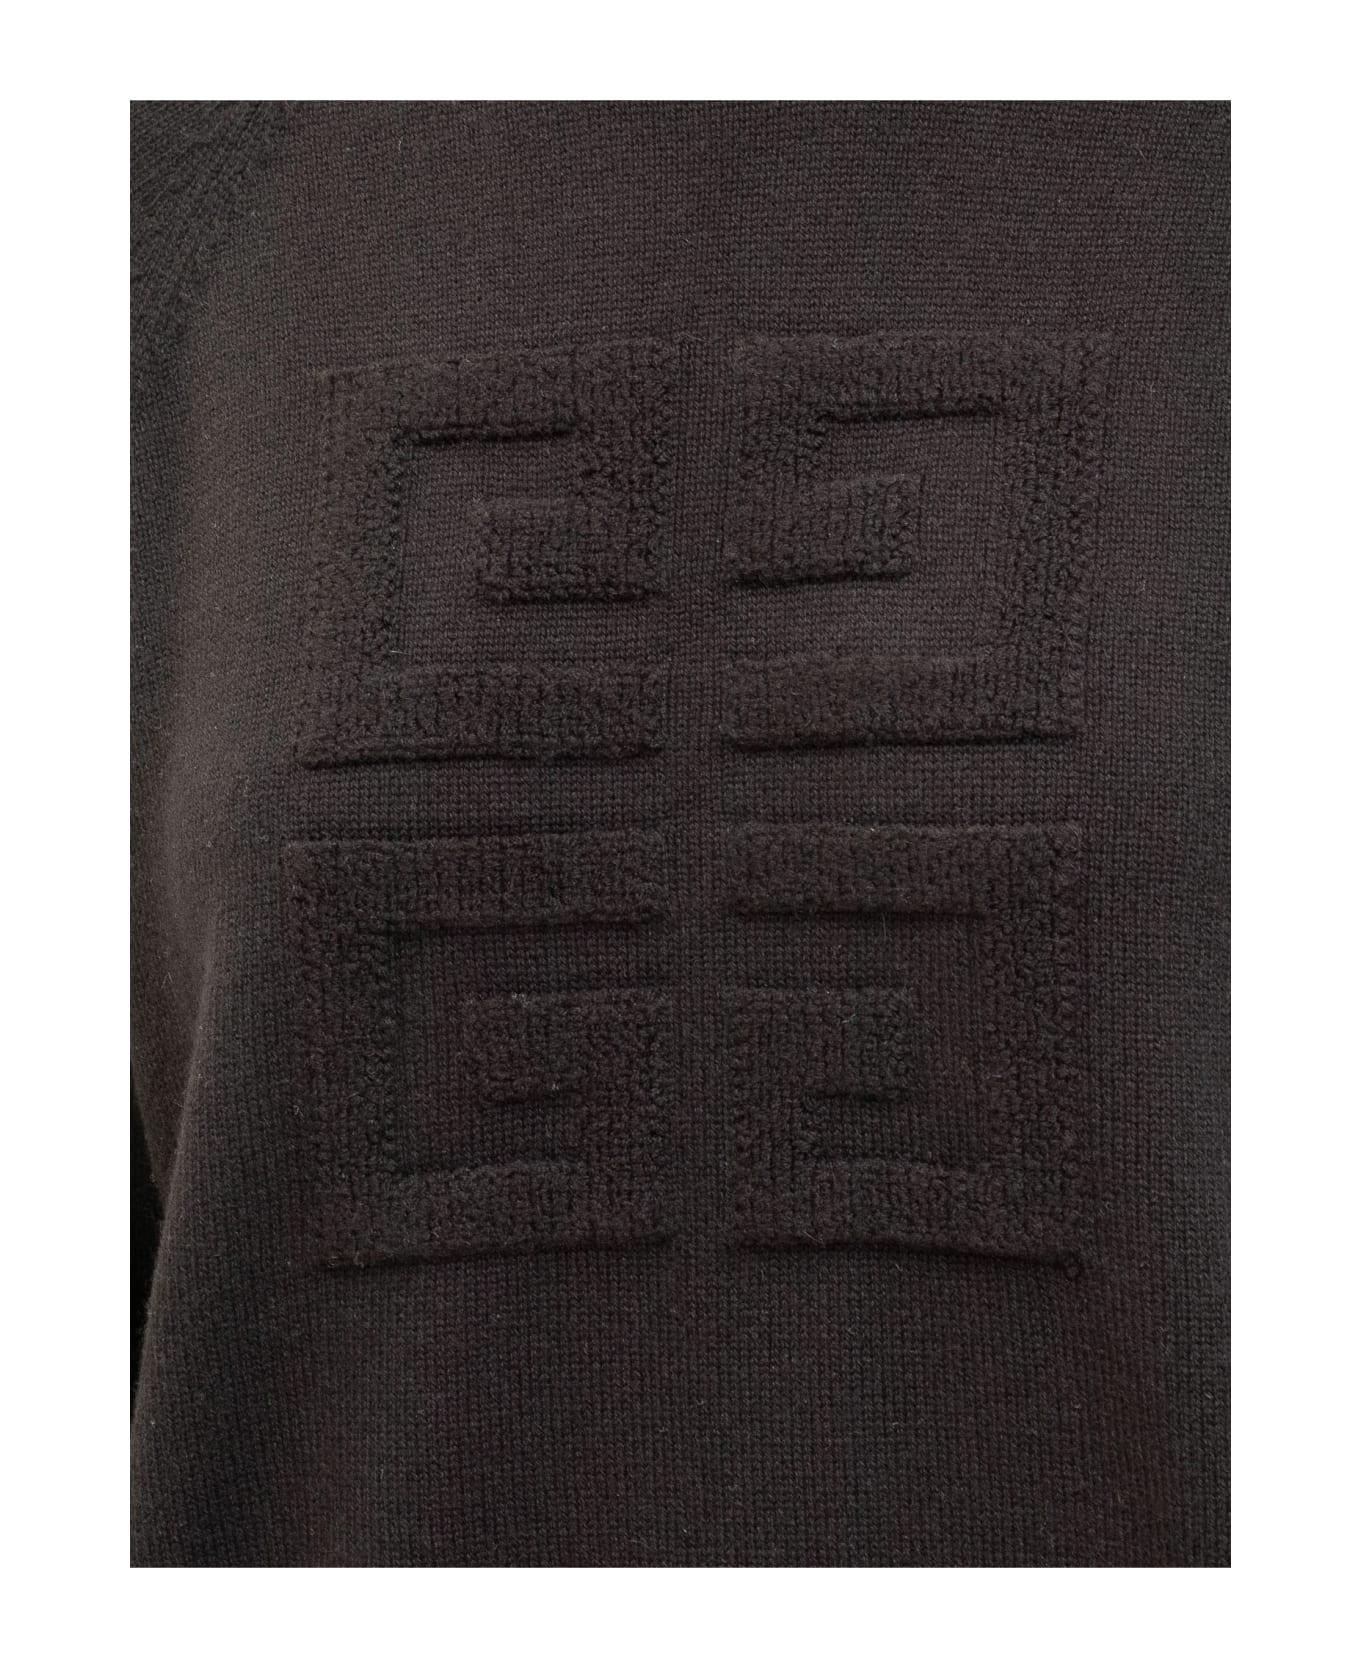 Givenchy 4g Sweater - Black